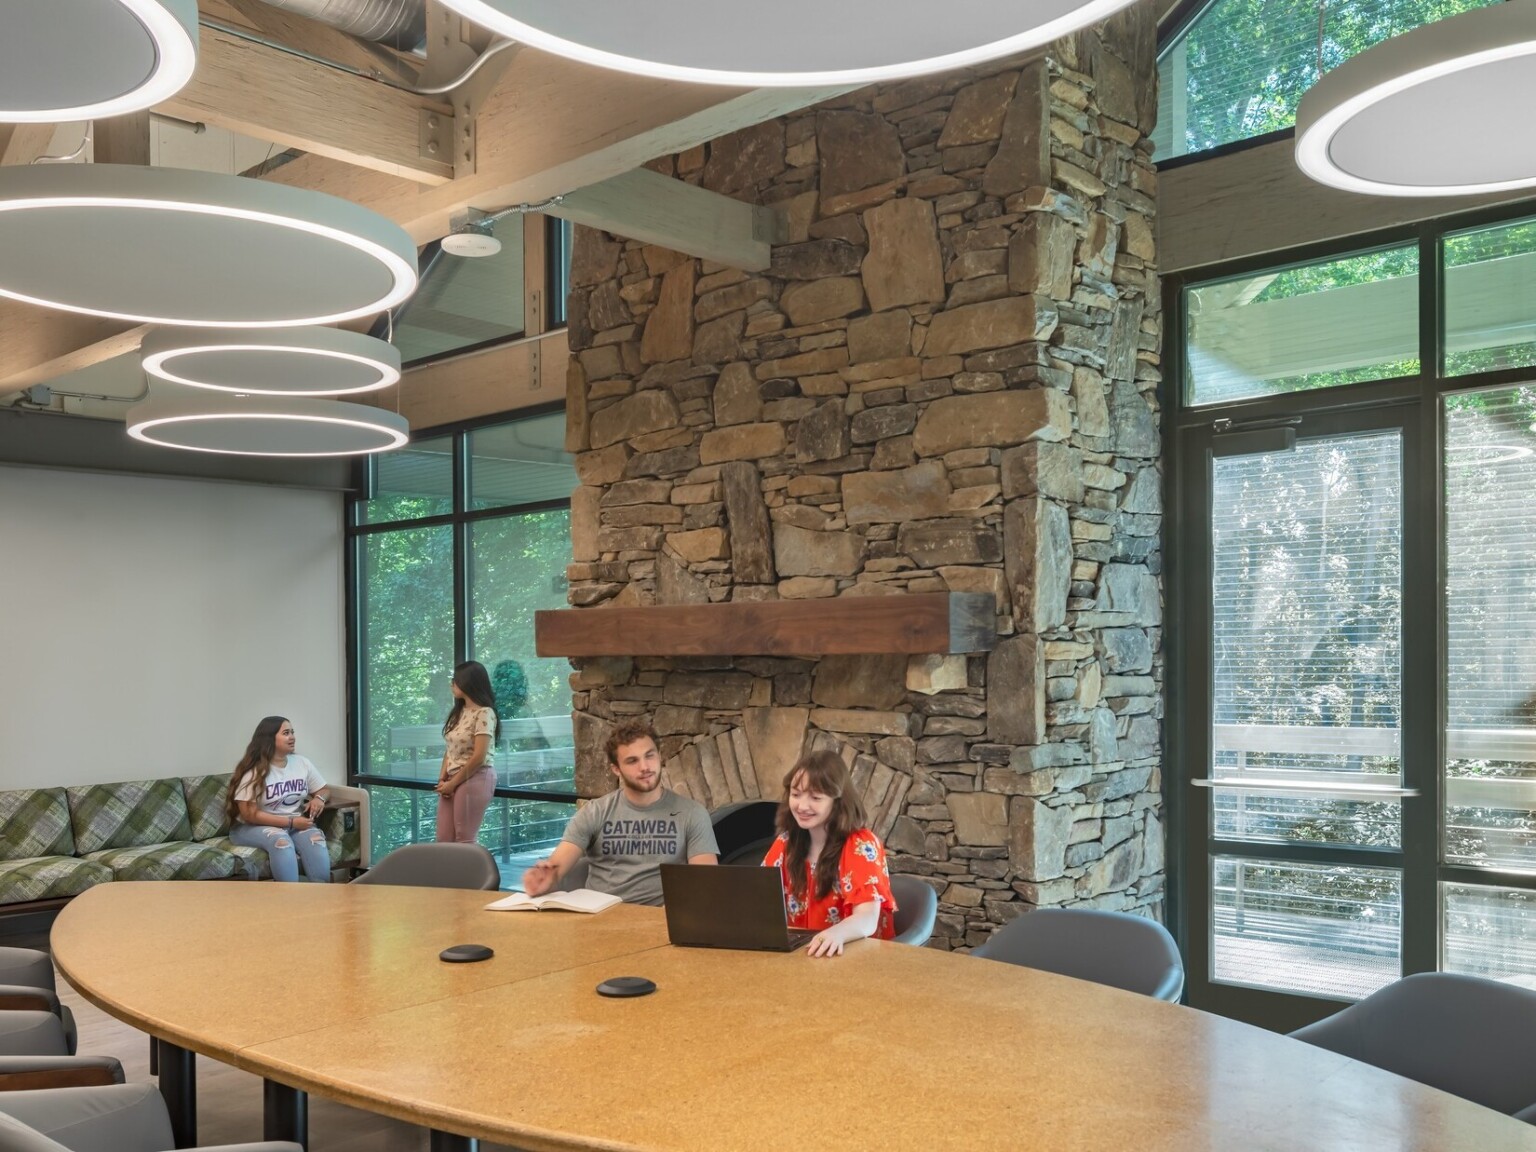 Common room, tall ceiling with wood beams accents, round pendant lights, stone fireplace in higher education setting, floor to ceiling windows